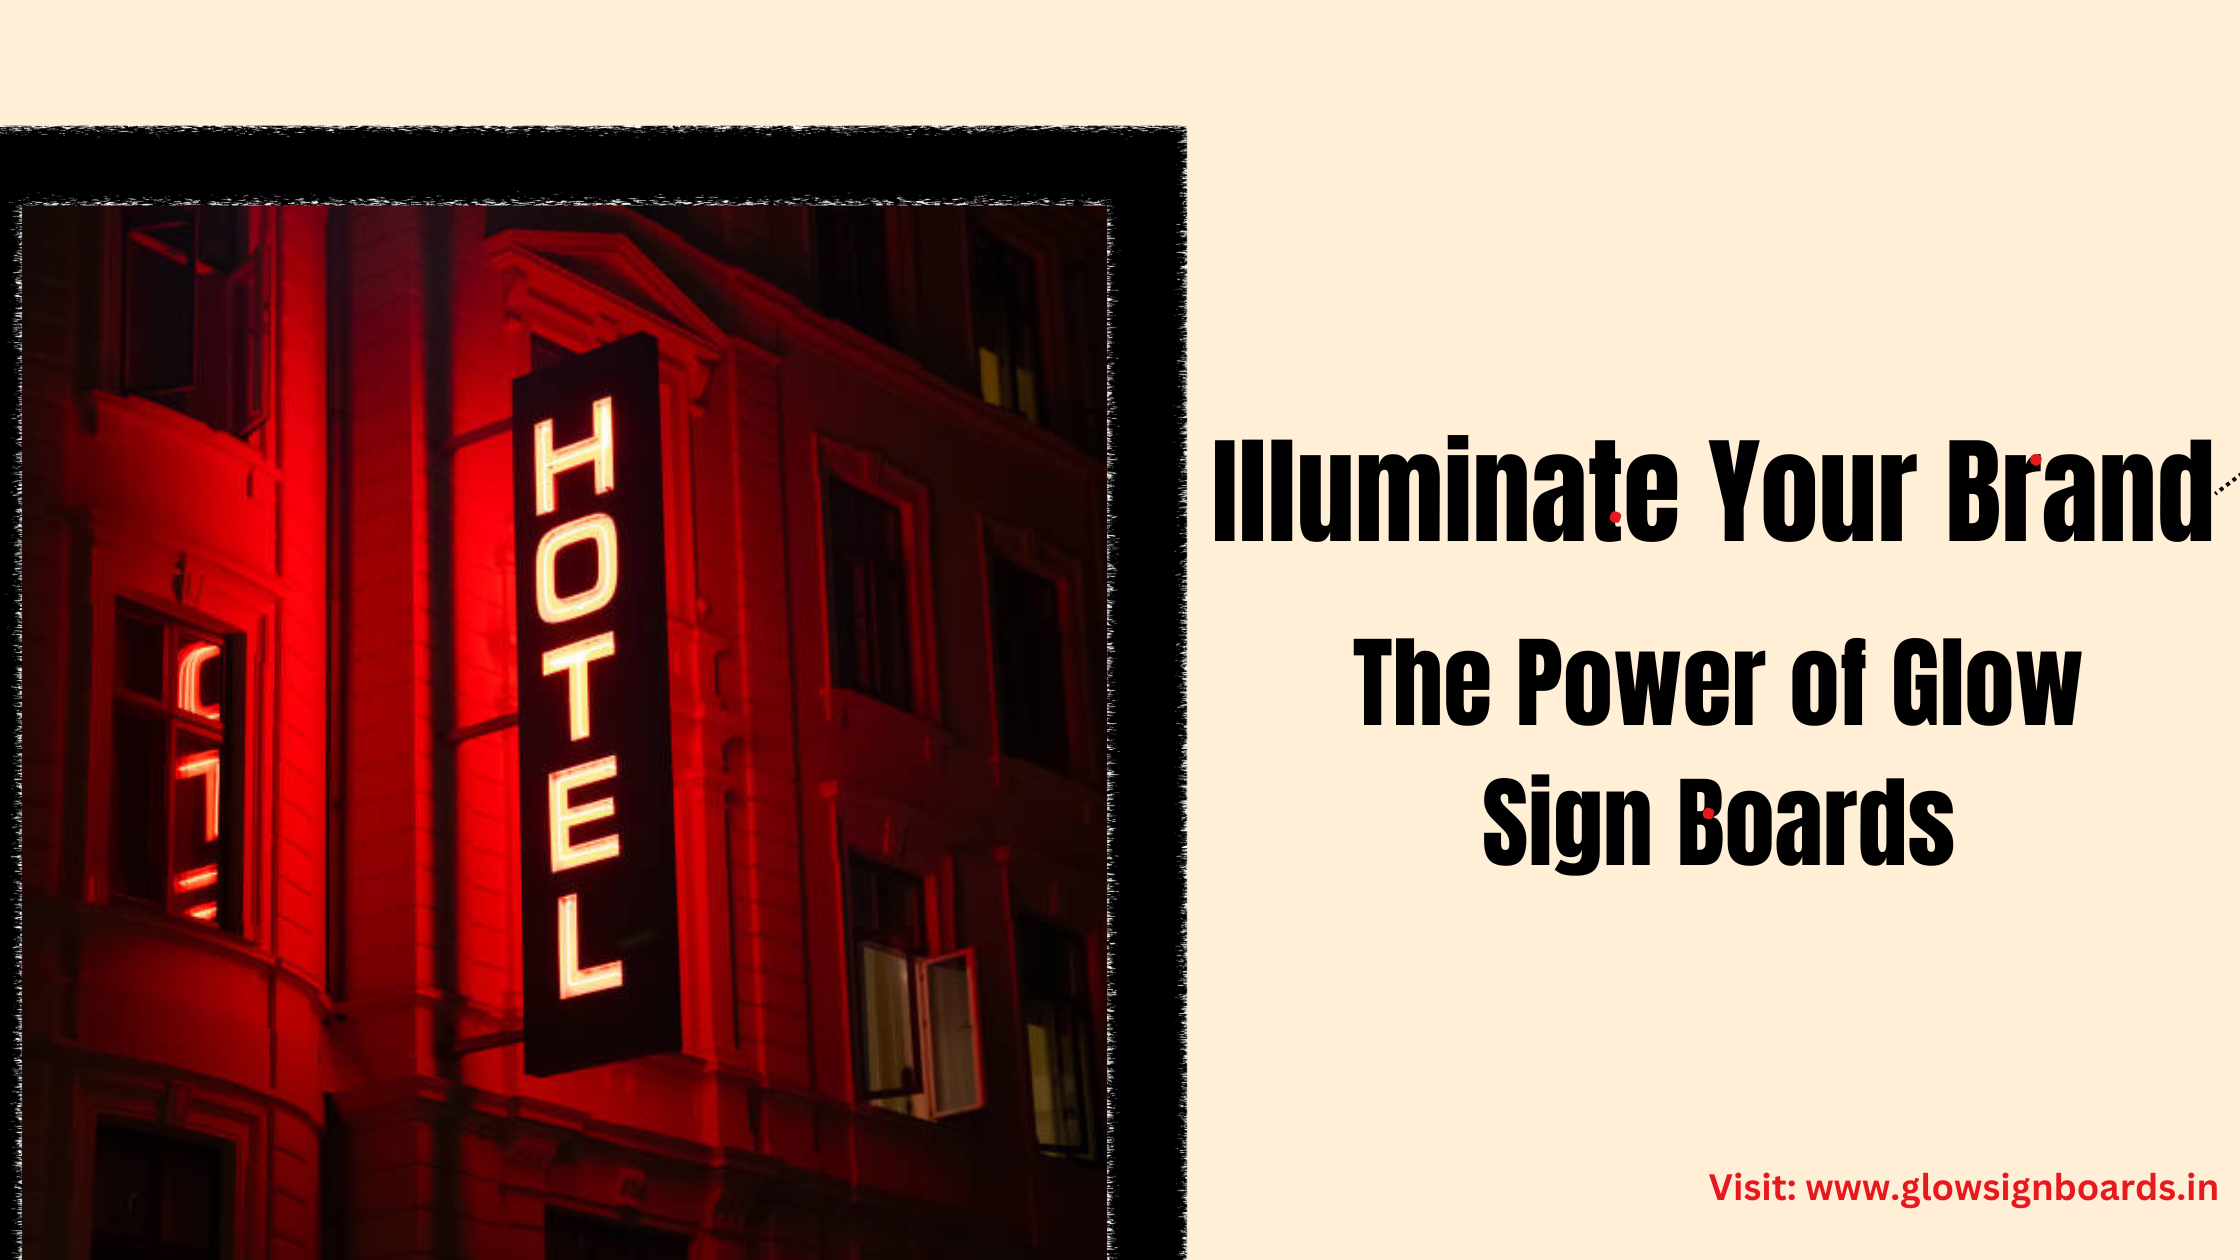 Discover the power of glow sign boards and how they can illuminate your brand. Explore design tips and benefits.